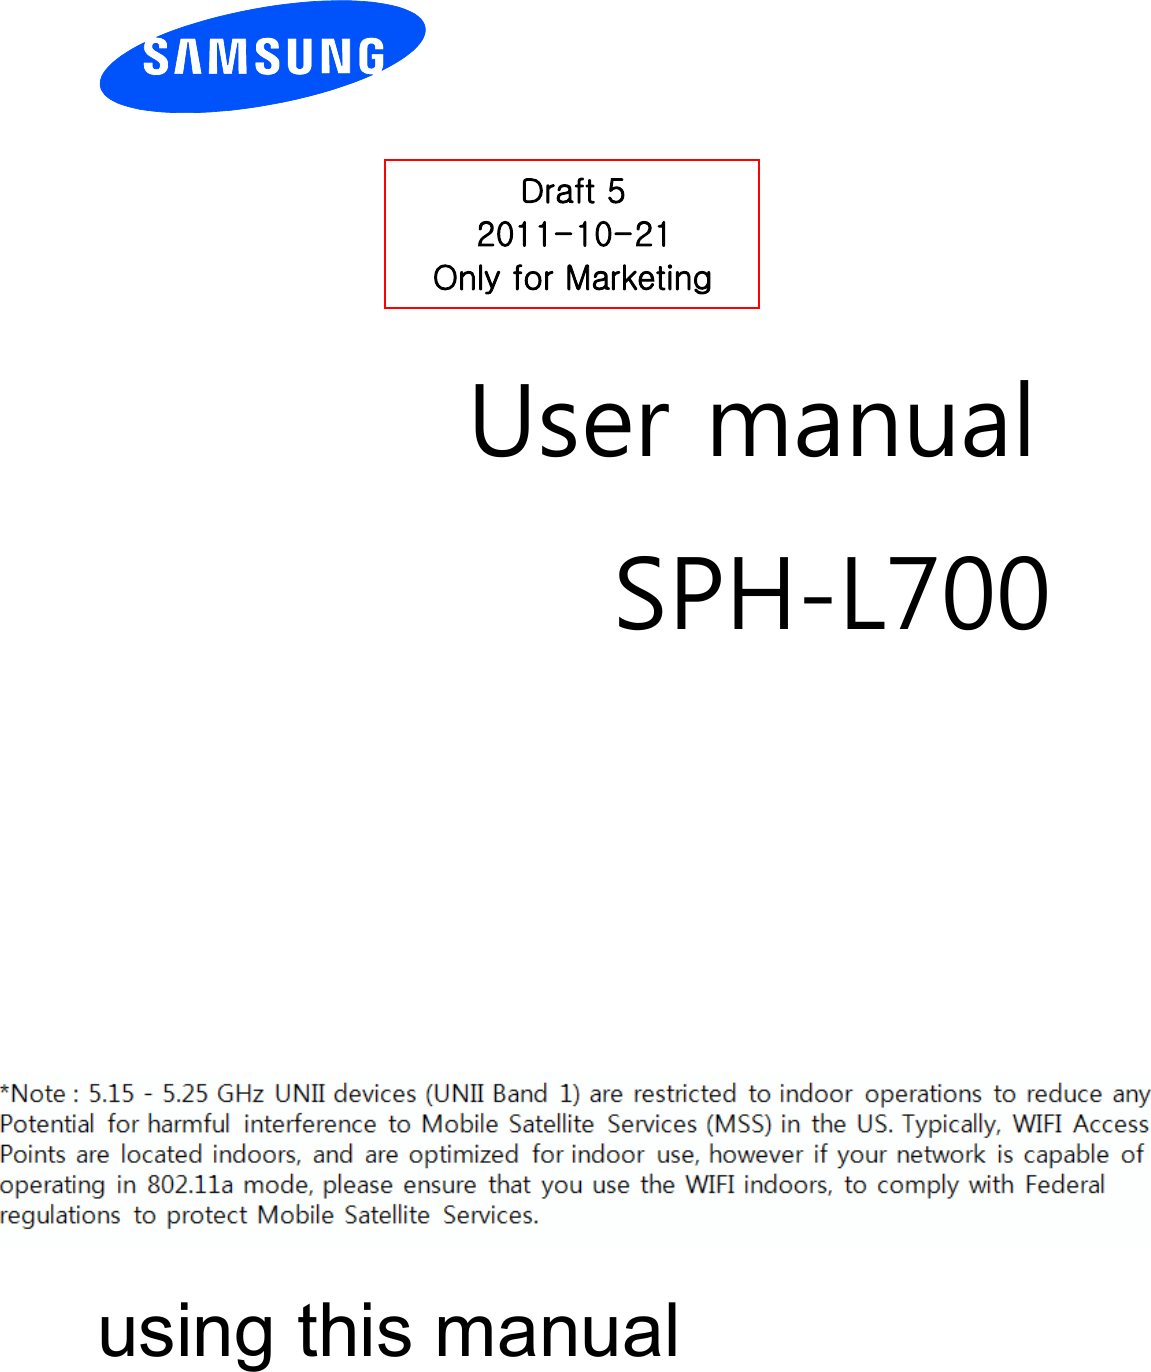         User manual SPH-L700                  using this manual Draft 52011-10-21 Only for Marketing 